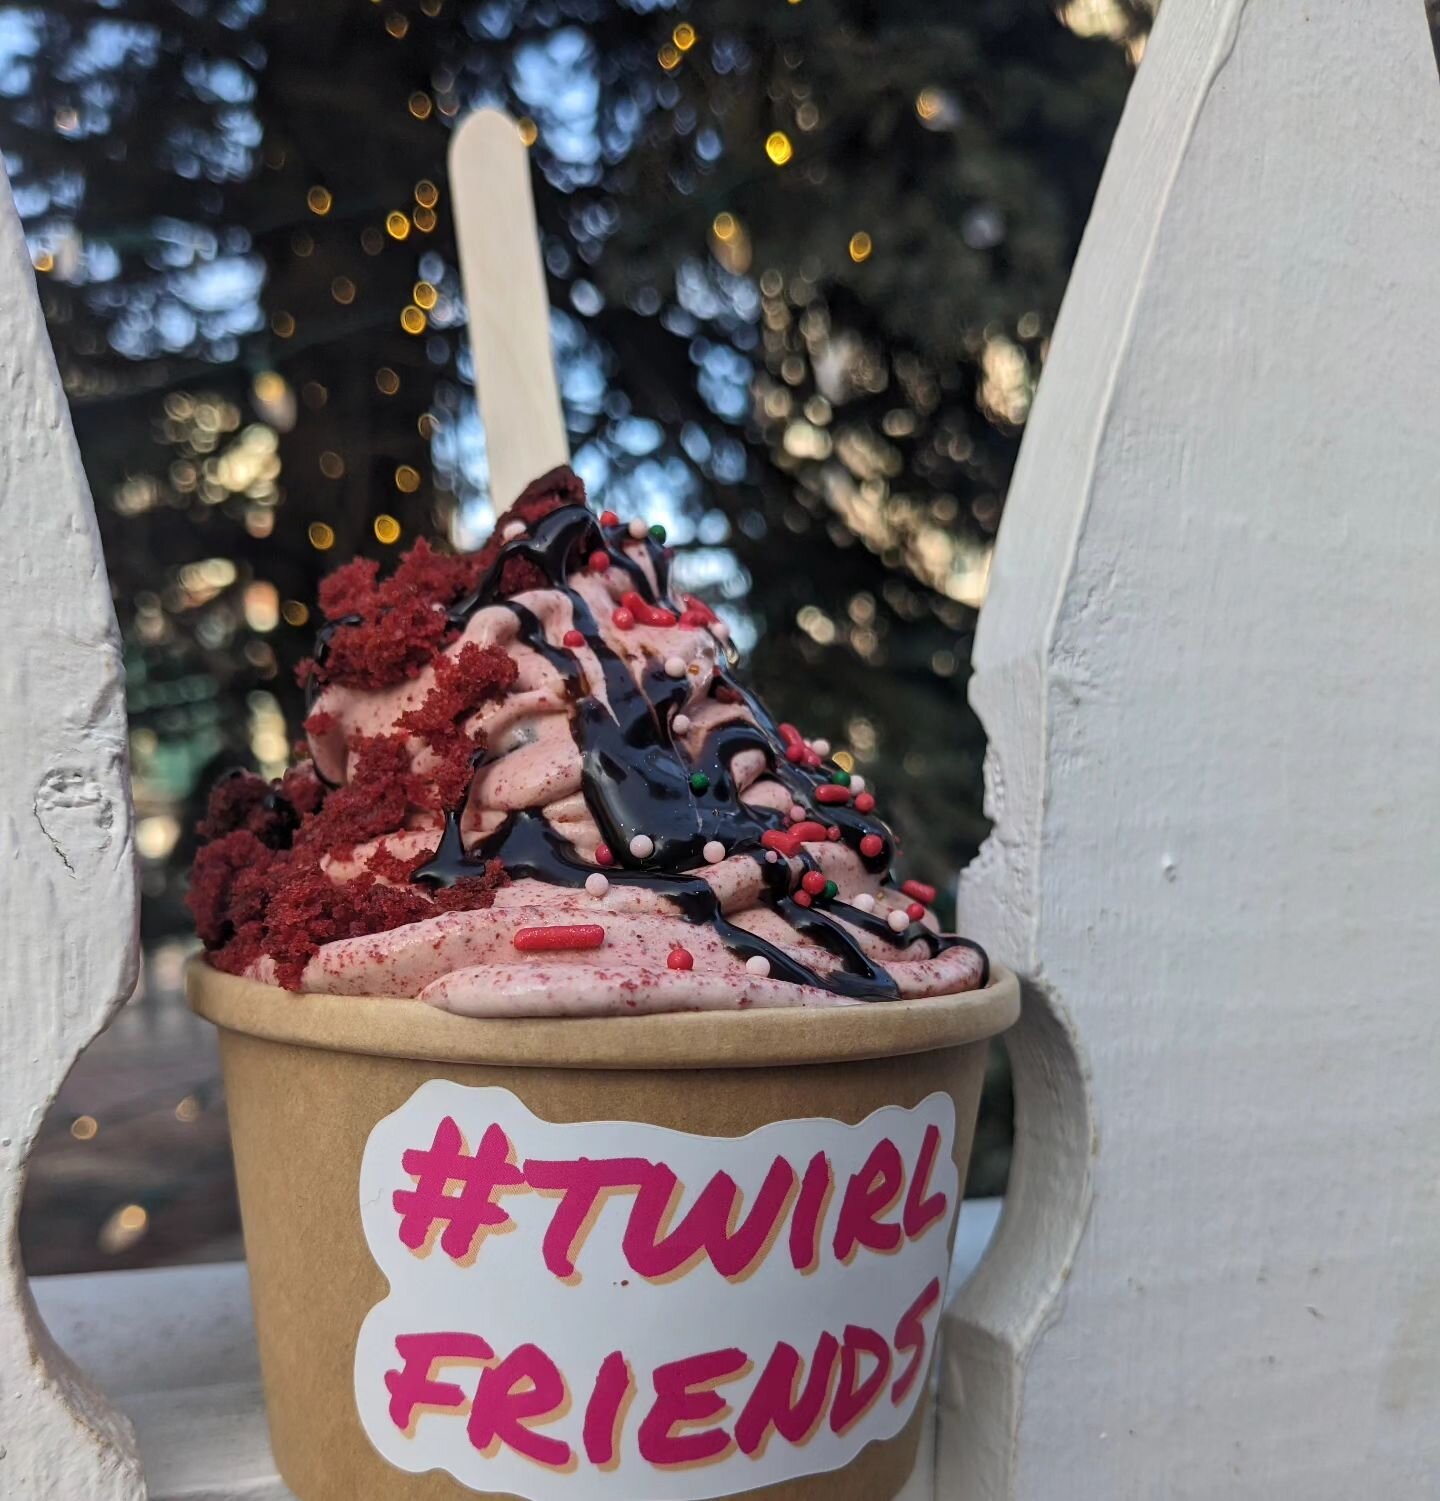 Crimson and Clover! 

This cutie is giving 
chocolate covered orange 
X
cake and ice cream:

Red velvet cake twirled with ground cloves and orange
into vanilla ice cream,
plus chocolate drizzle and a few sprinks to tie it all together!

We are kickin